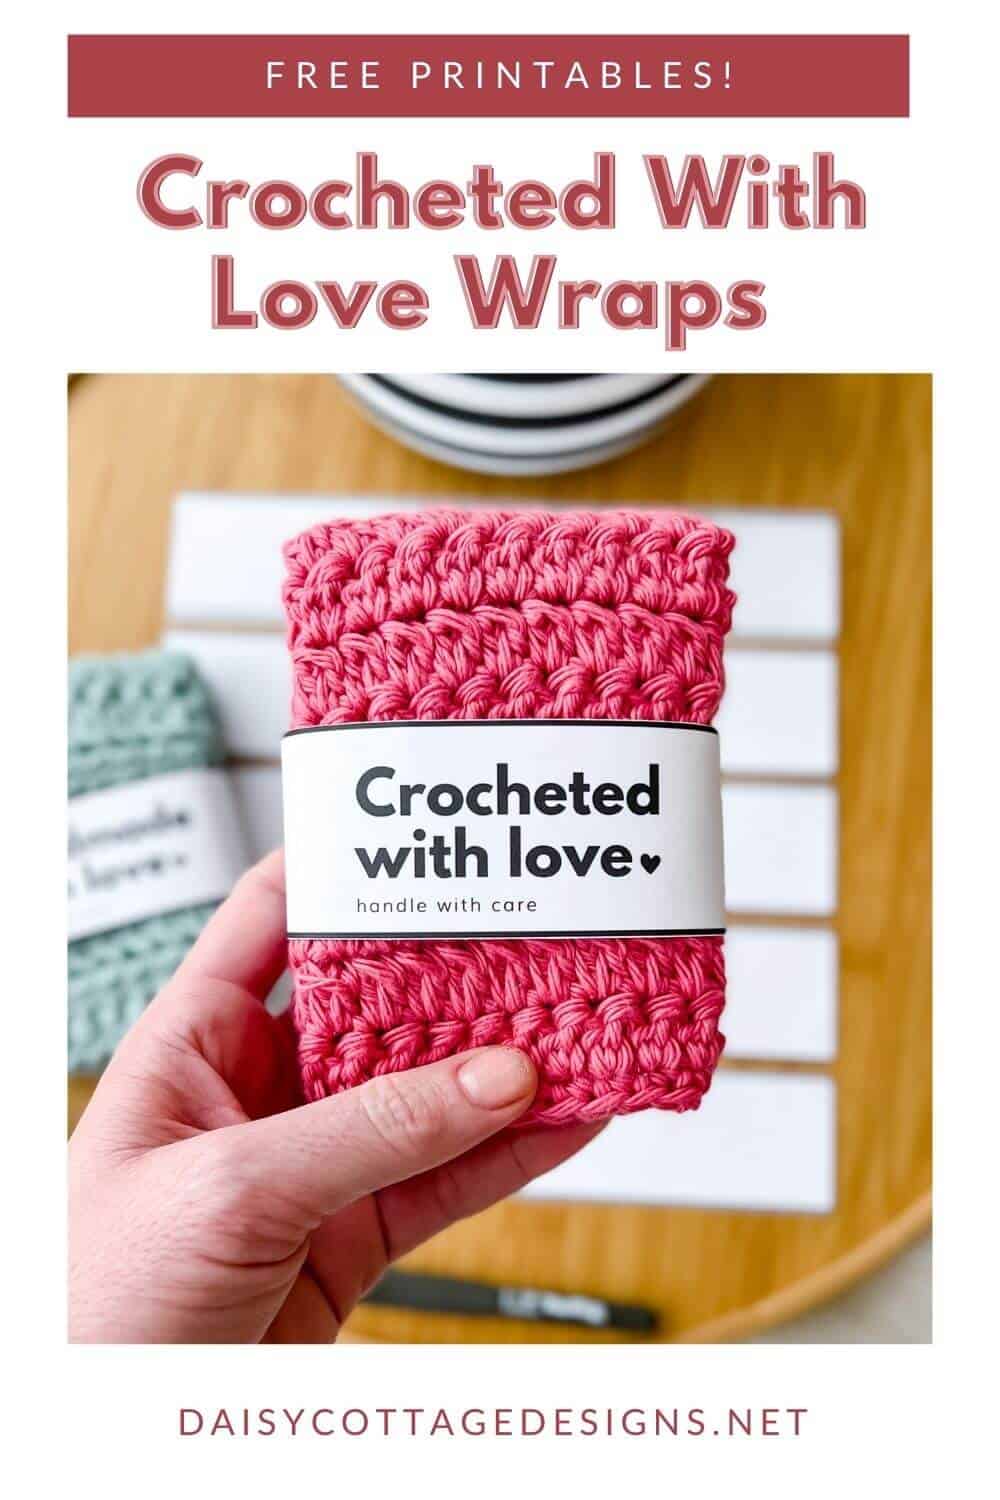 Use this free handmade with love printable label to dress up your handmade items. Perfect for small crochet and knit projects!